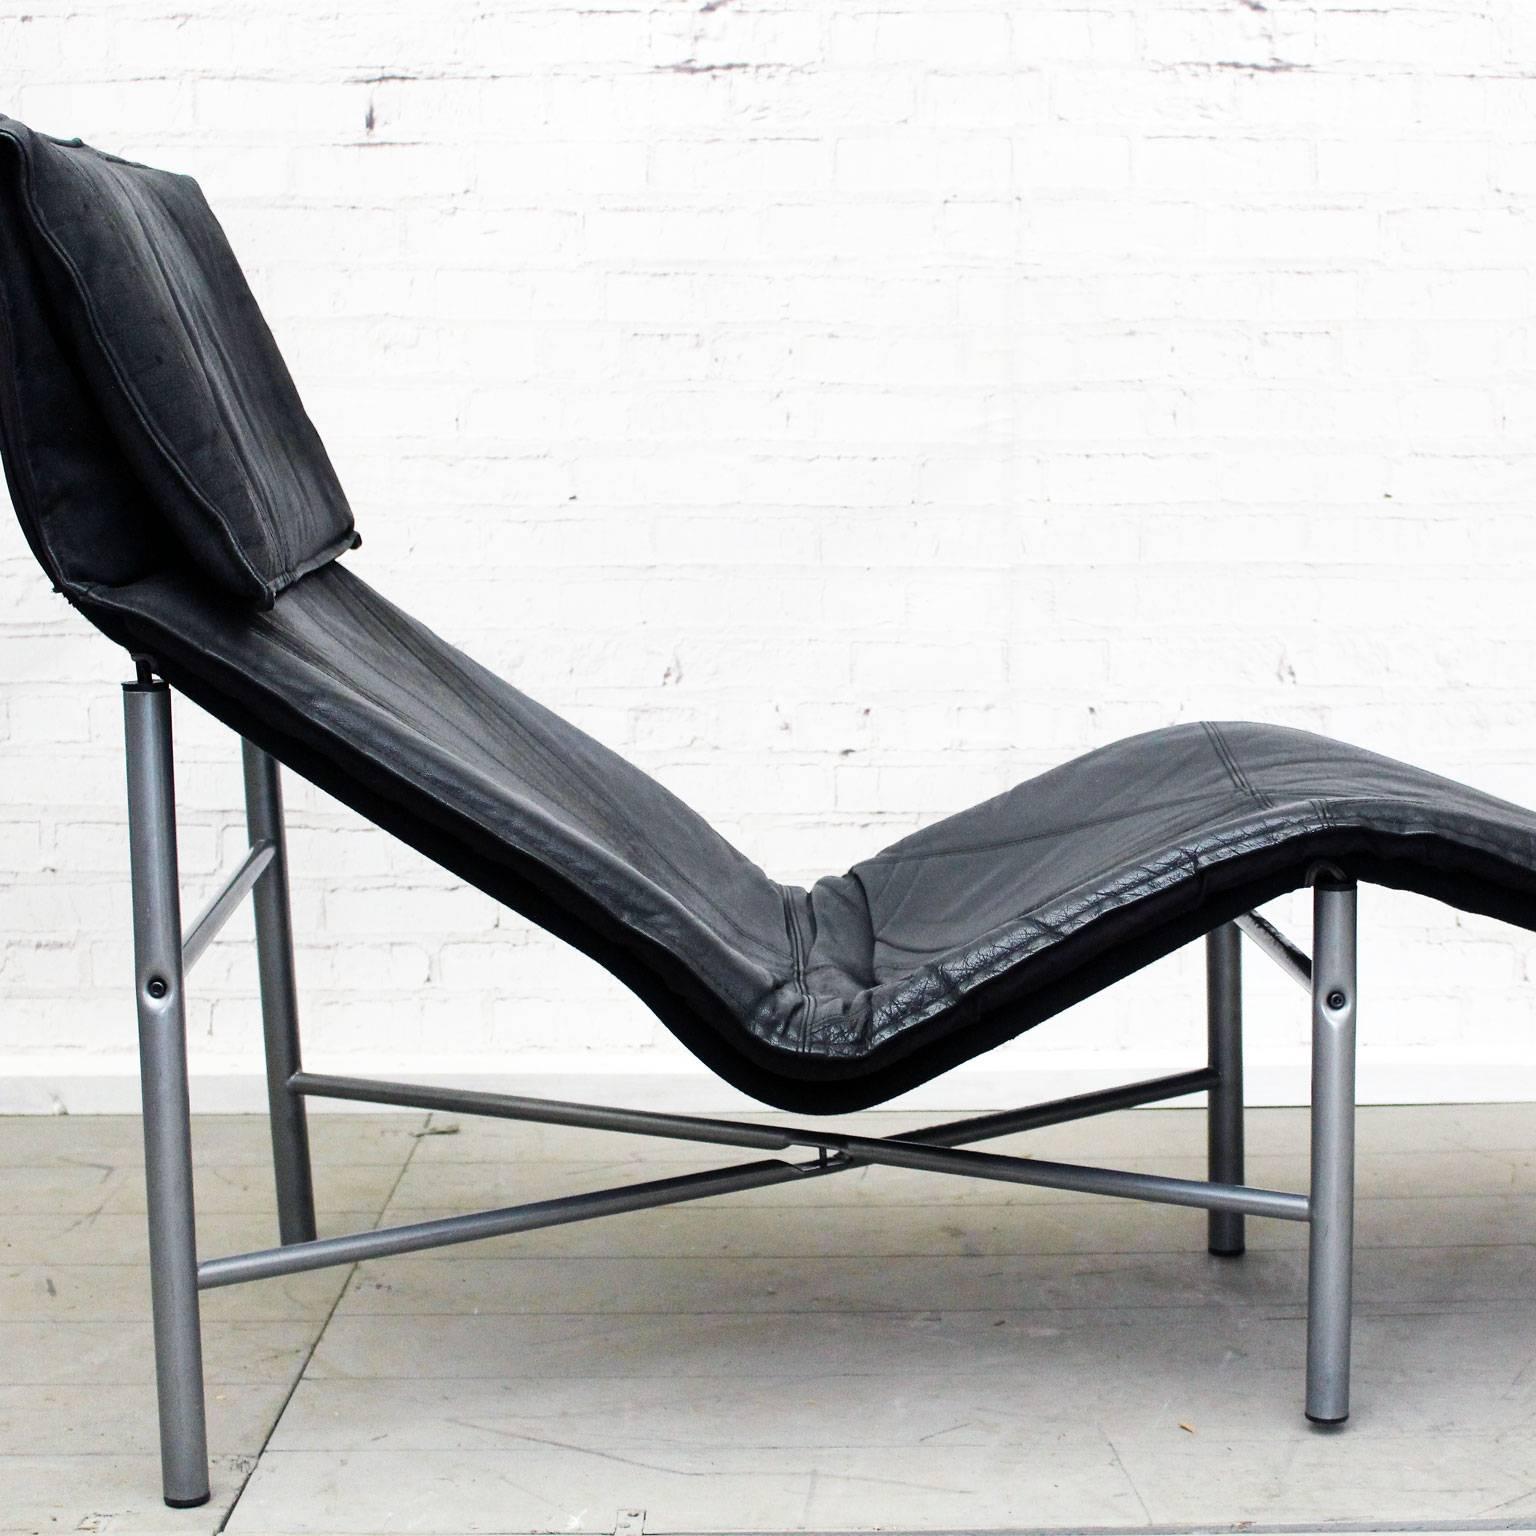 This very stylish black leather chaise longue was designed in the late 1970s/1980s by Swedish designer, Tord Bjorklund. We love the metal frame, chic profile and original black leather, but just as importantly it is incredibly comfortable. Great for